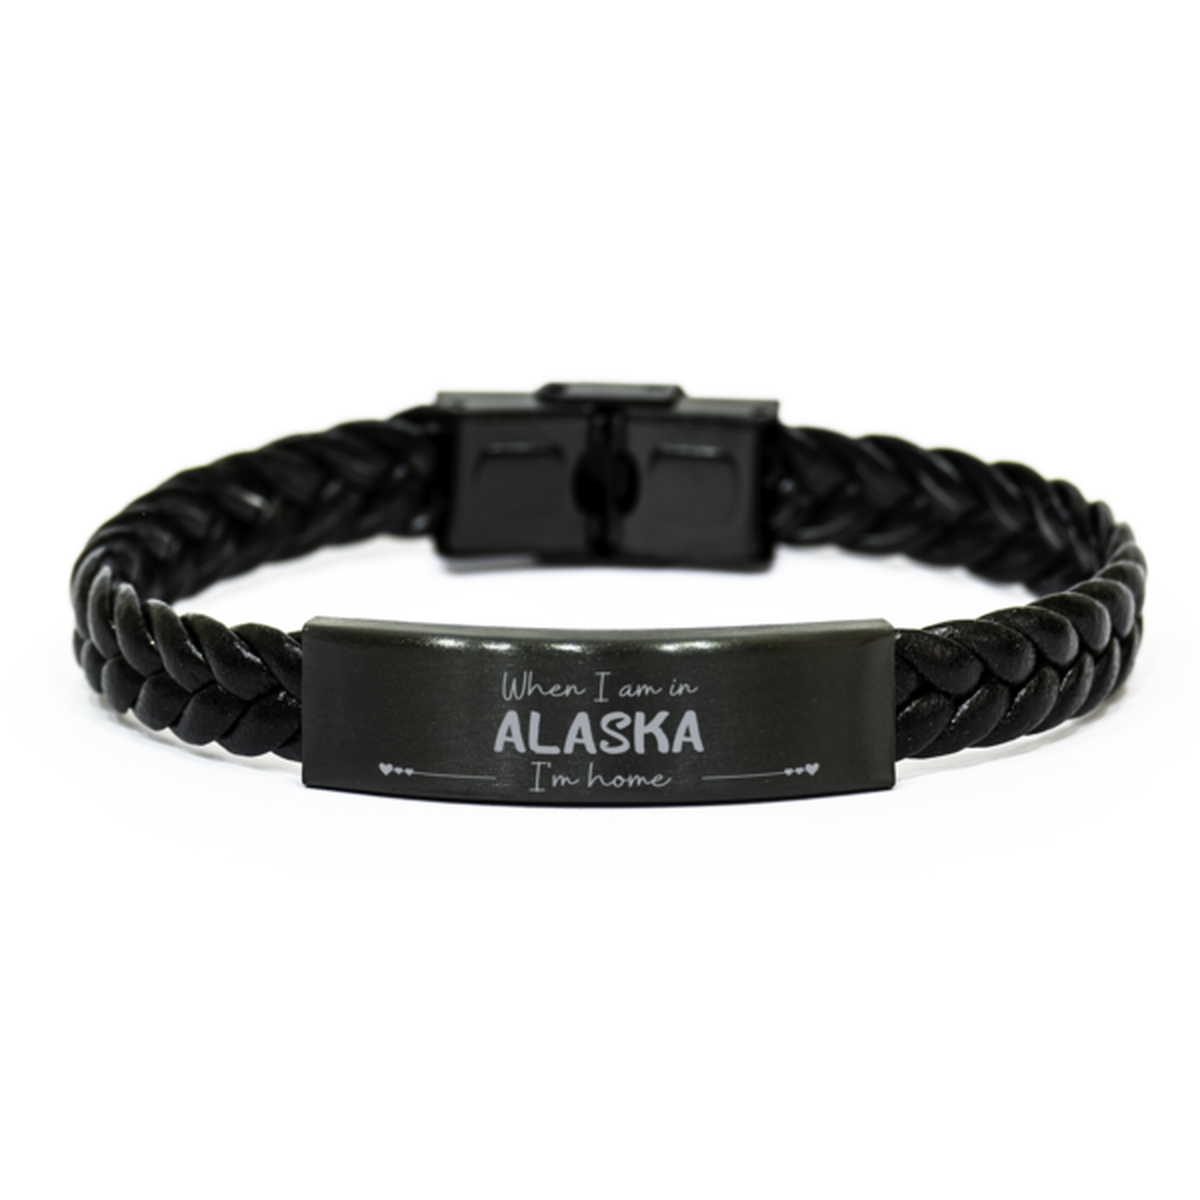 When I am in Alaska I'm home Braided Leather Bracelet, Cheap Gifts For Alaska, State Alaska Birthday Gifts for Friends Coworker